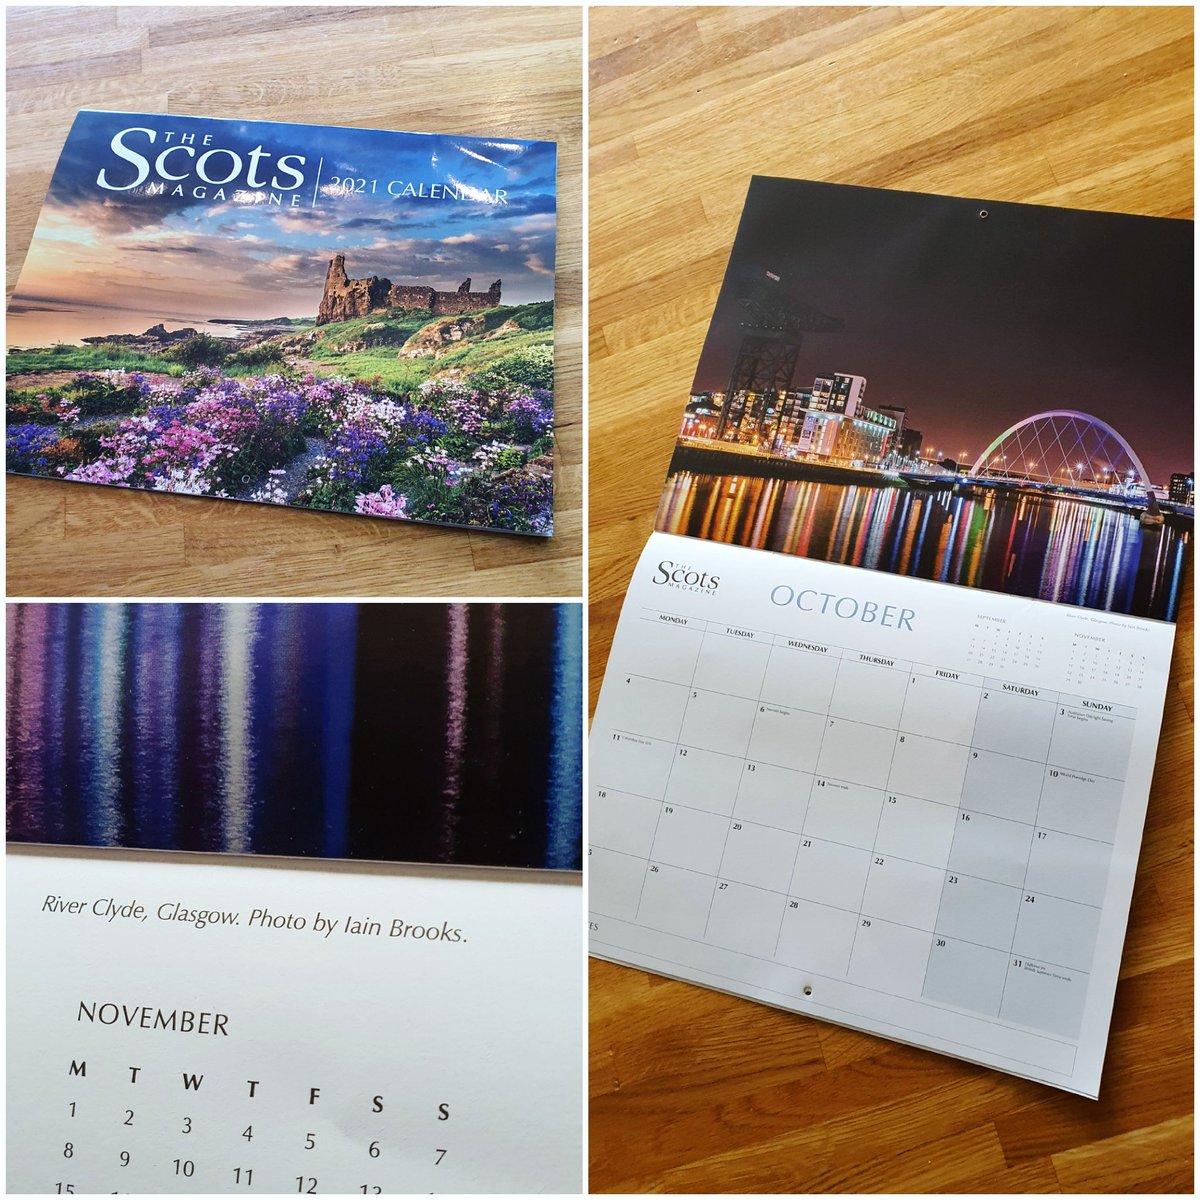 Delighted to be featured in #scotsmagazine calendar 2021 with a shot of the Clyde Arc. Just happens to be on my birthday month too!

#scotland #clydearc #riverclyde #Glasgow #outandaboutscotland